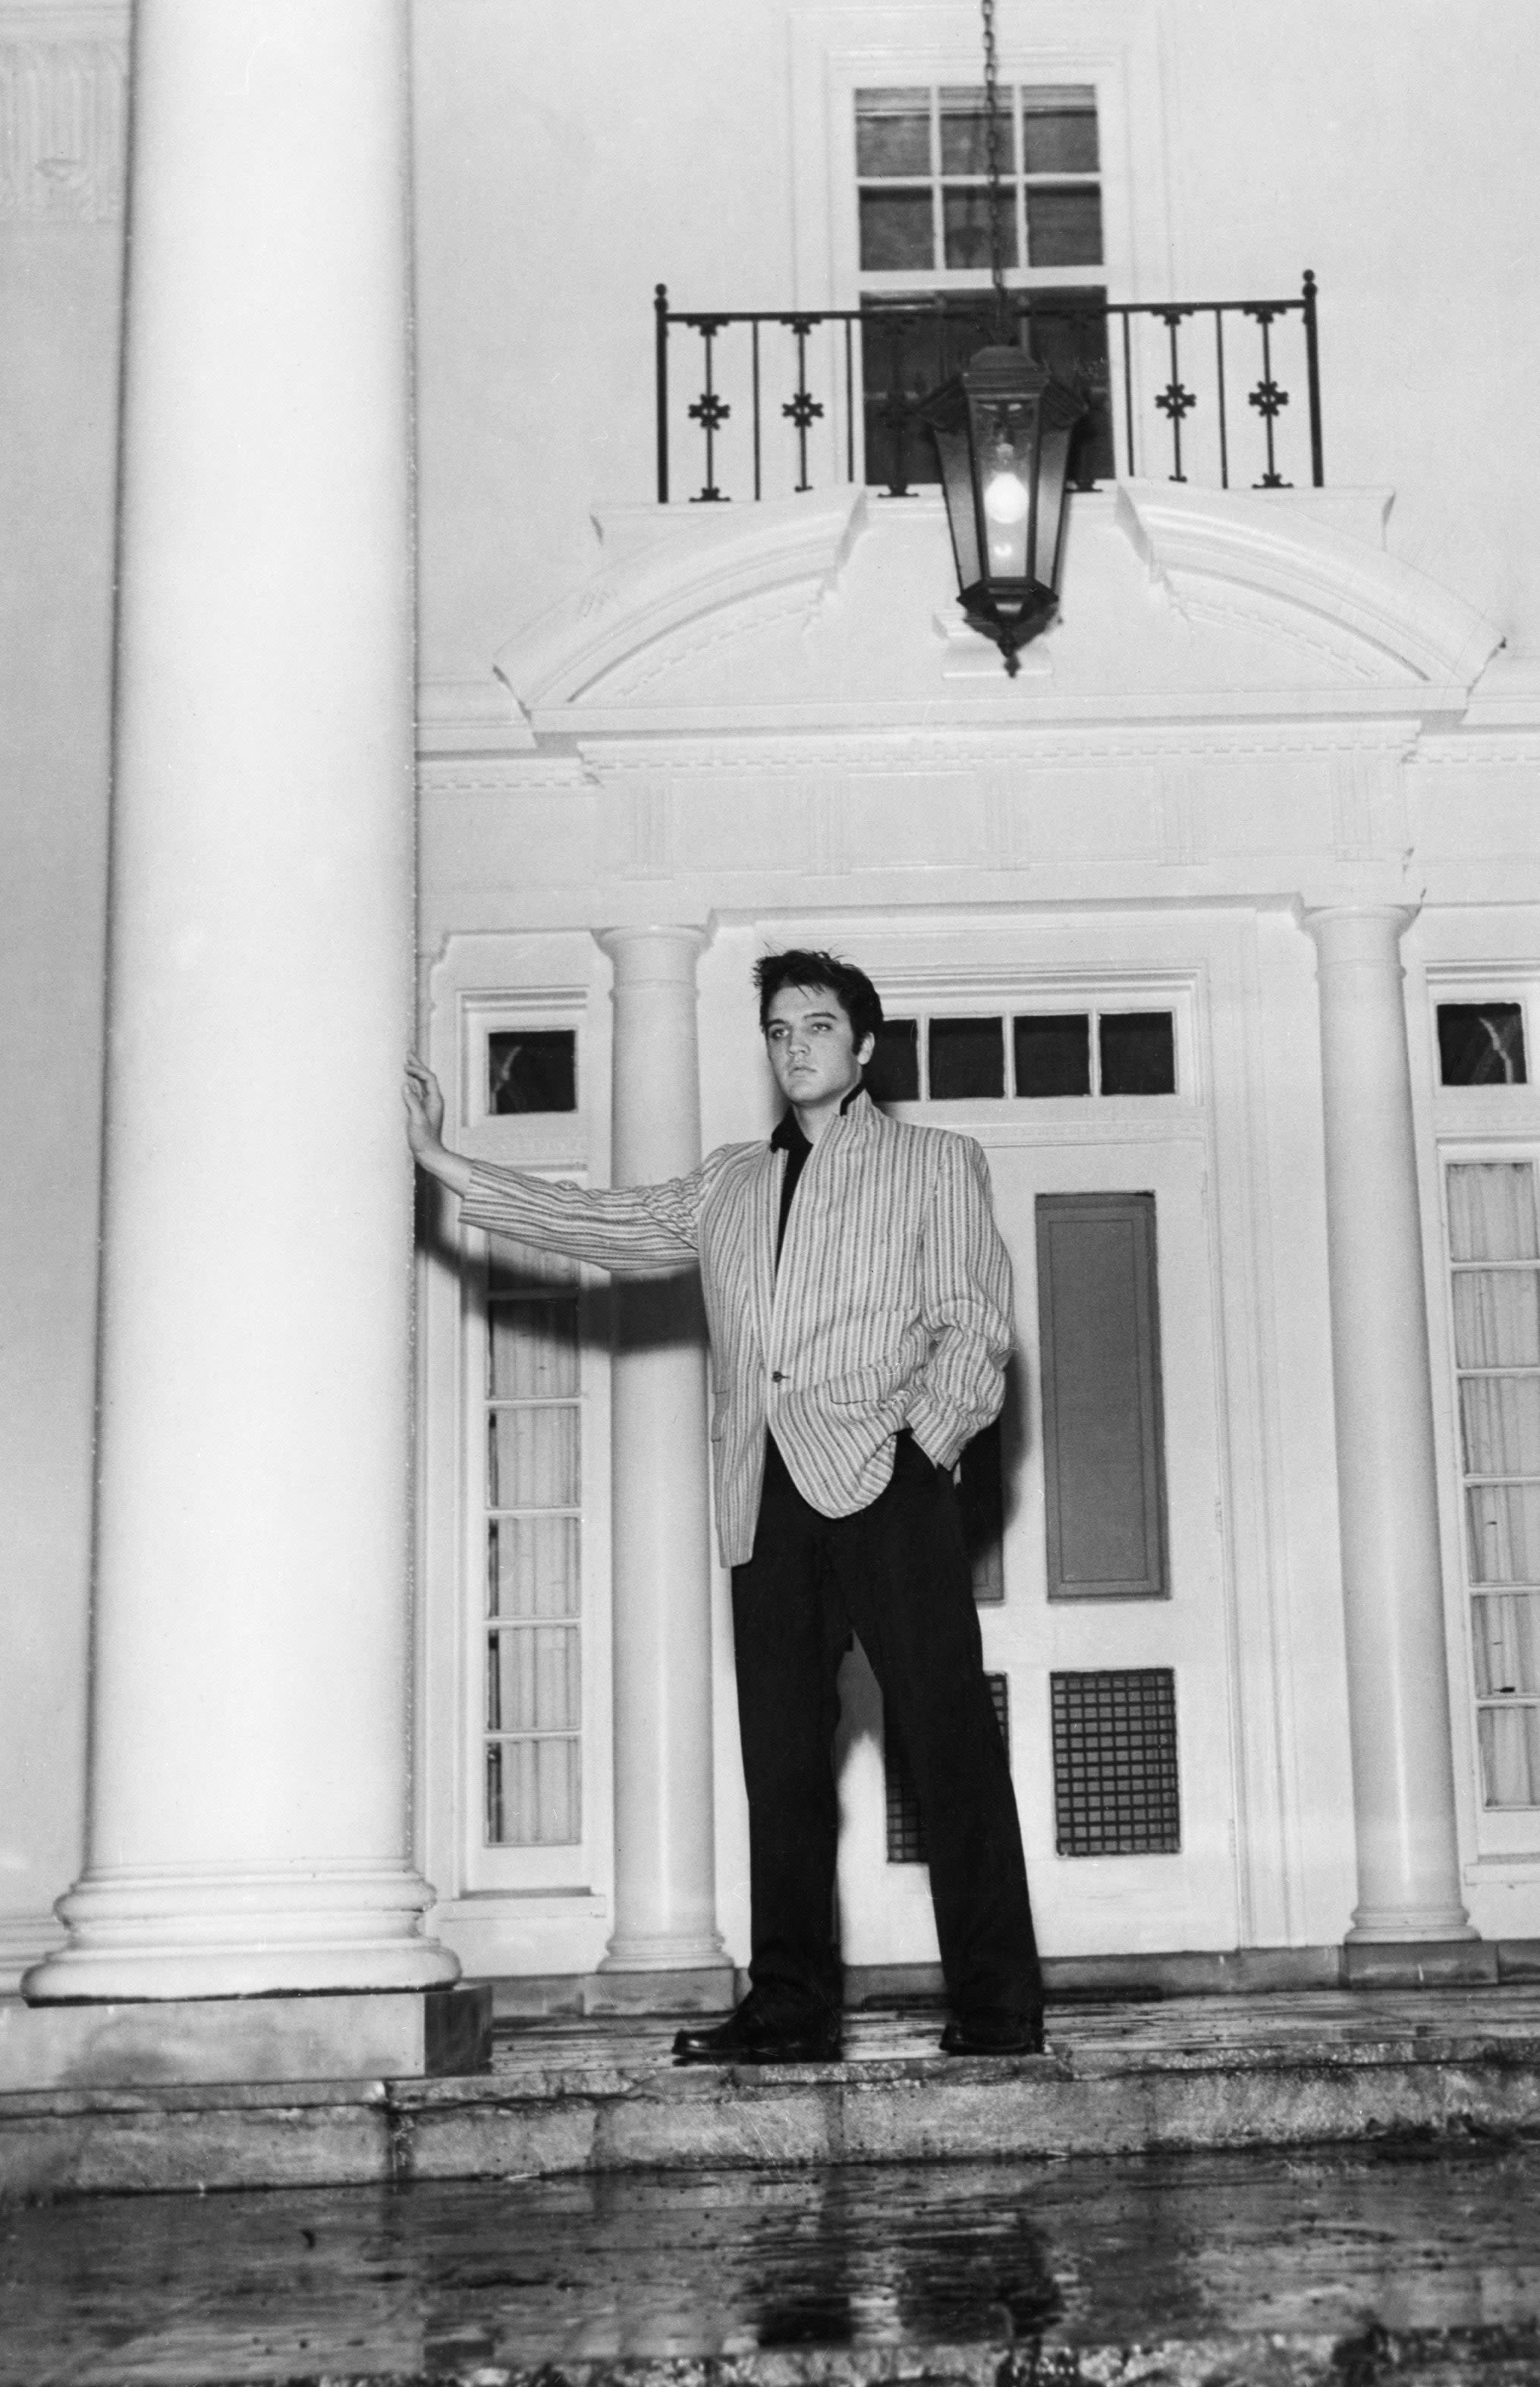 The Graceland Foreclosure Has Seemingly Been Averted